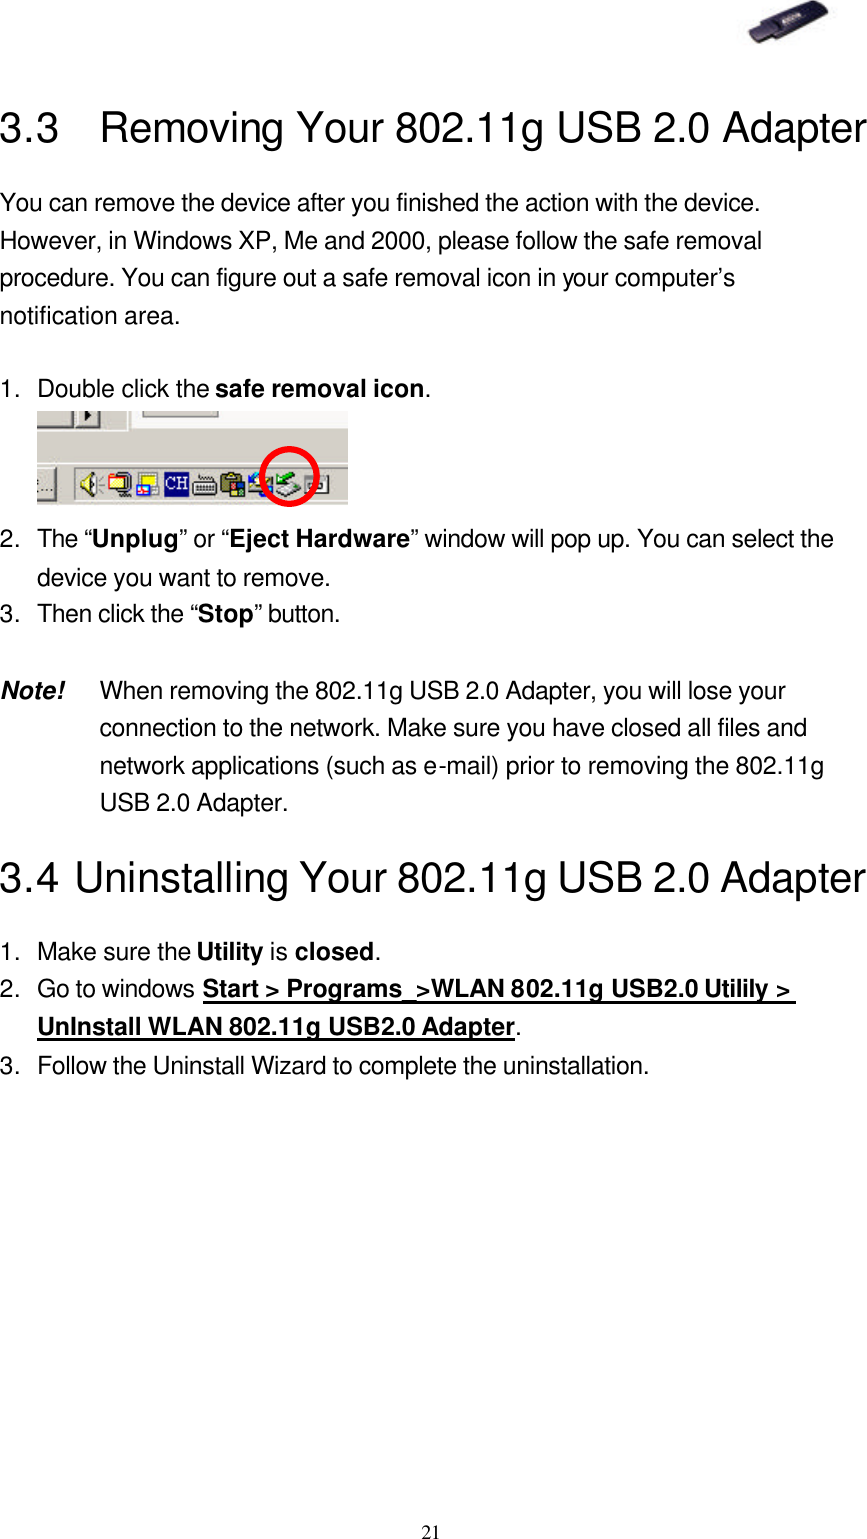   21 3.3 Removing Your 802.11g USB 2.0 Adapter You can remove the device after you finished the action with the device. However, in Windows XP, Me and 2000, please follow the safe removal procedure. You can figure out a safe removal icon in your computer’s notification area.  1. Double click the safe removal icon.  2. The “Unplug” or “Eject Hardware” window will pop up. You can select the device you want to remove. 3. Then click the “Stop” button.  Note! When removing the 802.11g USB 2.0 Adapter, you will lose your connection to the network. Make sure you have closed all files and network applications (such as e-mail) prior to removing the 802.11g USB 2.0 Adapter. 3.4 Uninstalling Your 802.11g USB 2.0 Adapter 1. Make sure the Utility is closed. 2. Go to windows Start &gt; Programs_&gt;WLAN 802.11g USB2.0 Utilily &gt; UnInstall WLAN 802.11g USB2.0 Adapter. 3. Follow the Uninstall Wizard to complete the uninstallation. 